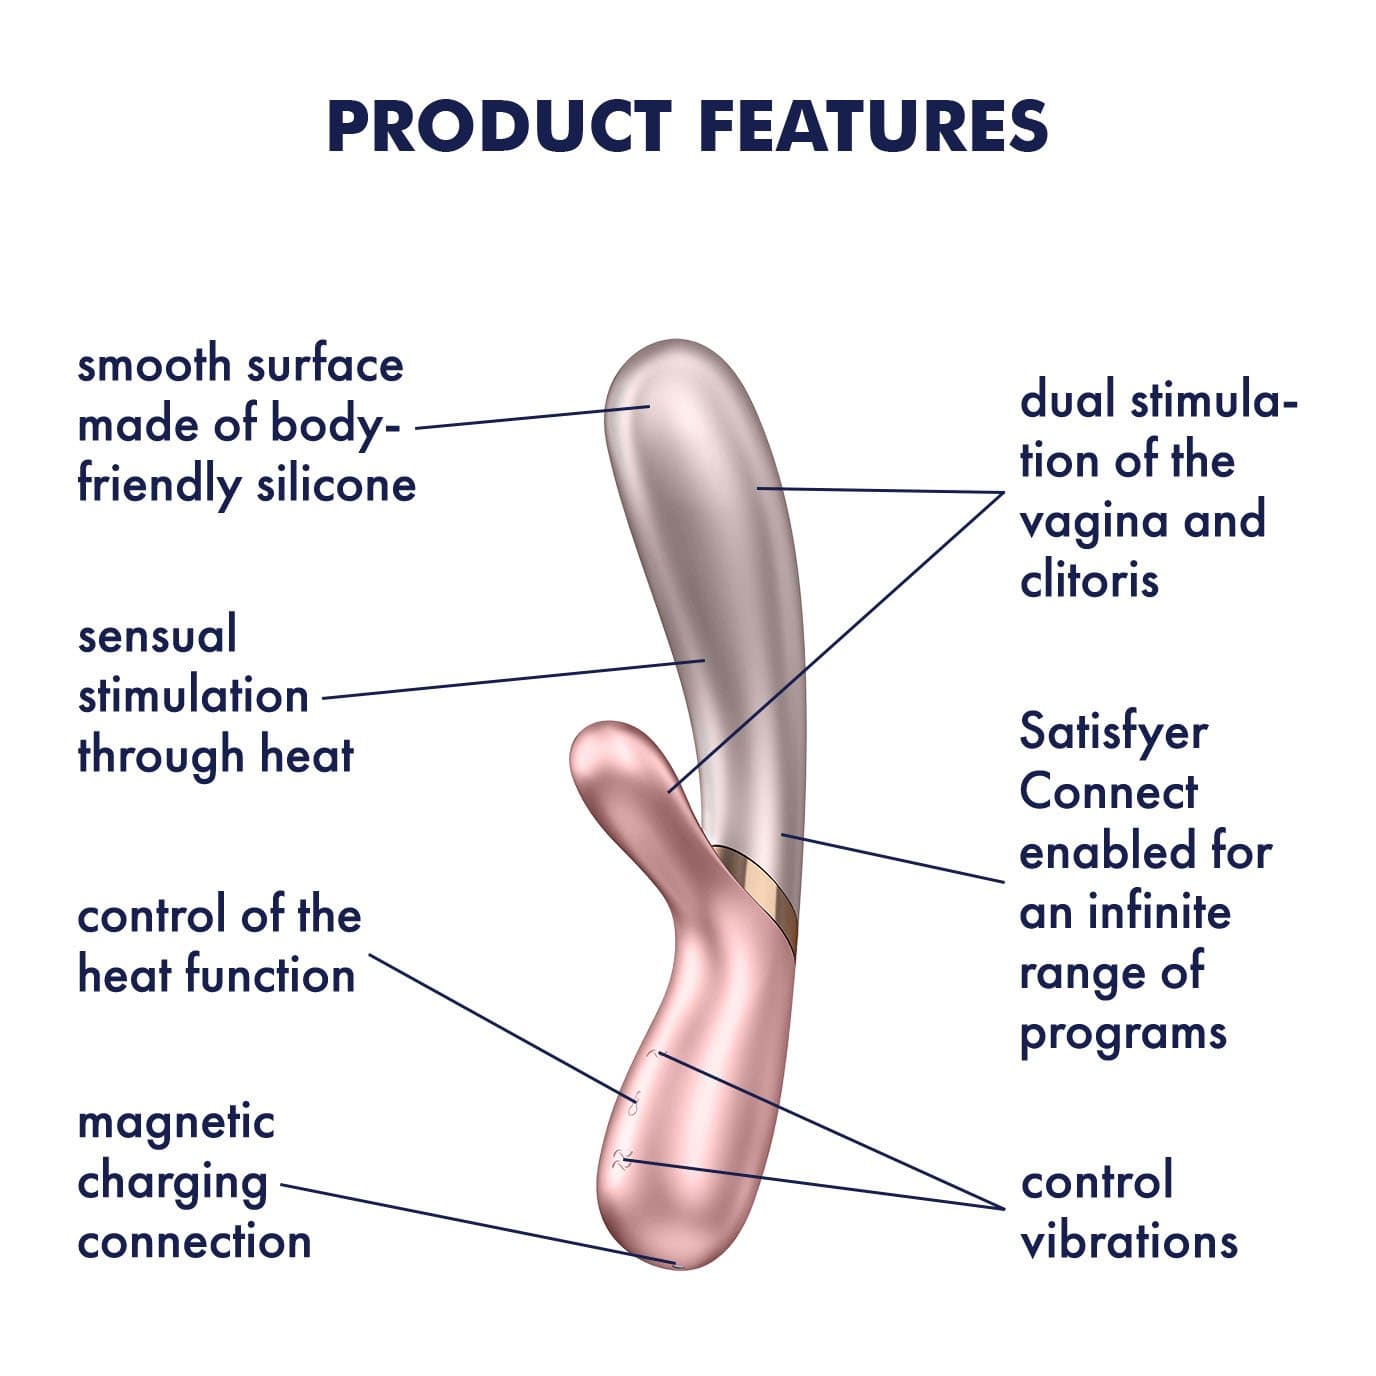 Satisfyer - Hot Lover Warming Rabbit Vibrator with Bluetooth and App (Pink/Dark Pink) Rabbit Dildo (Vibration) Rechargeable 520215271 CherryAffairs